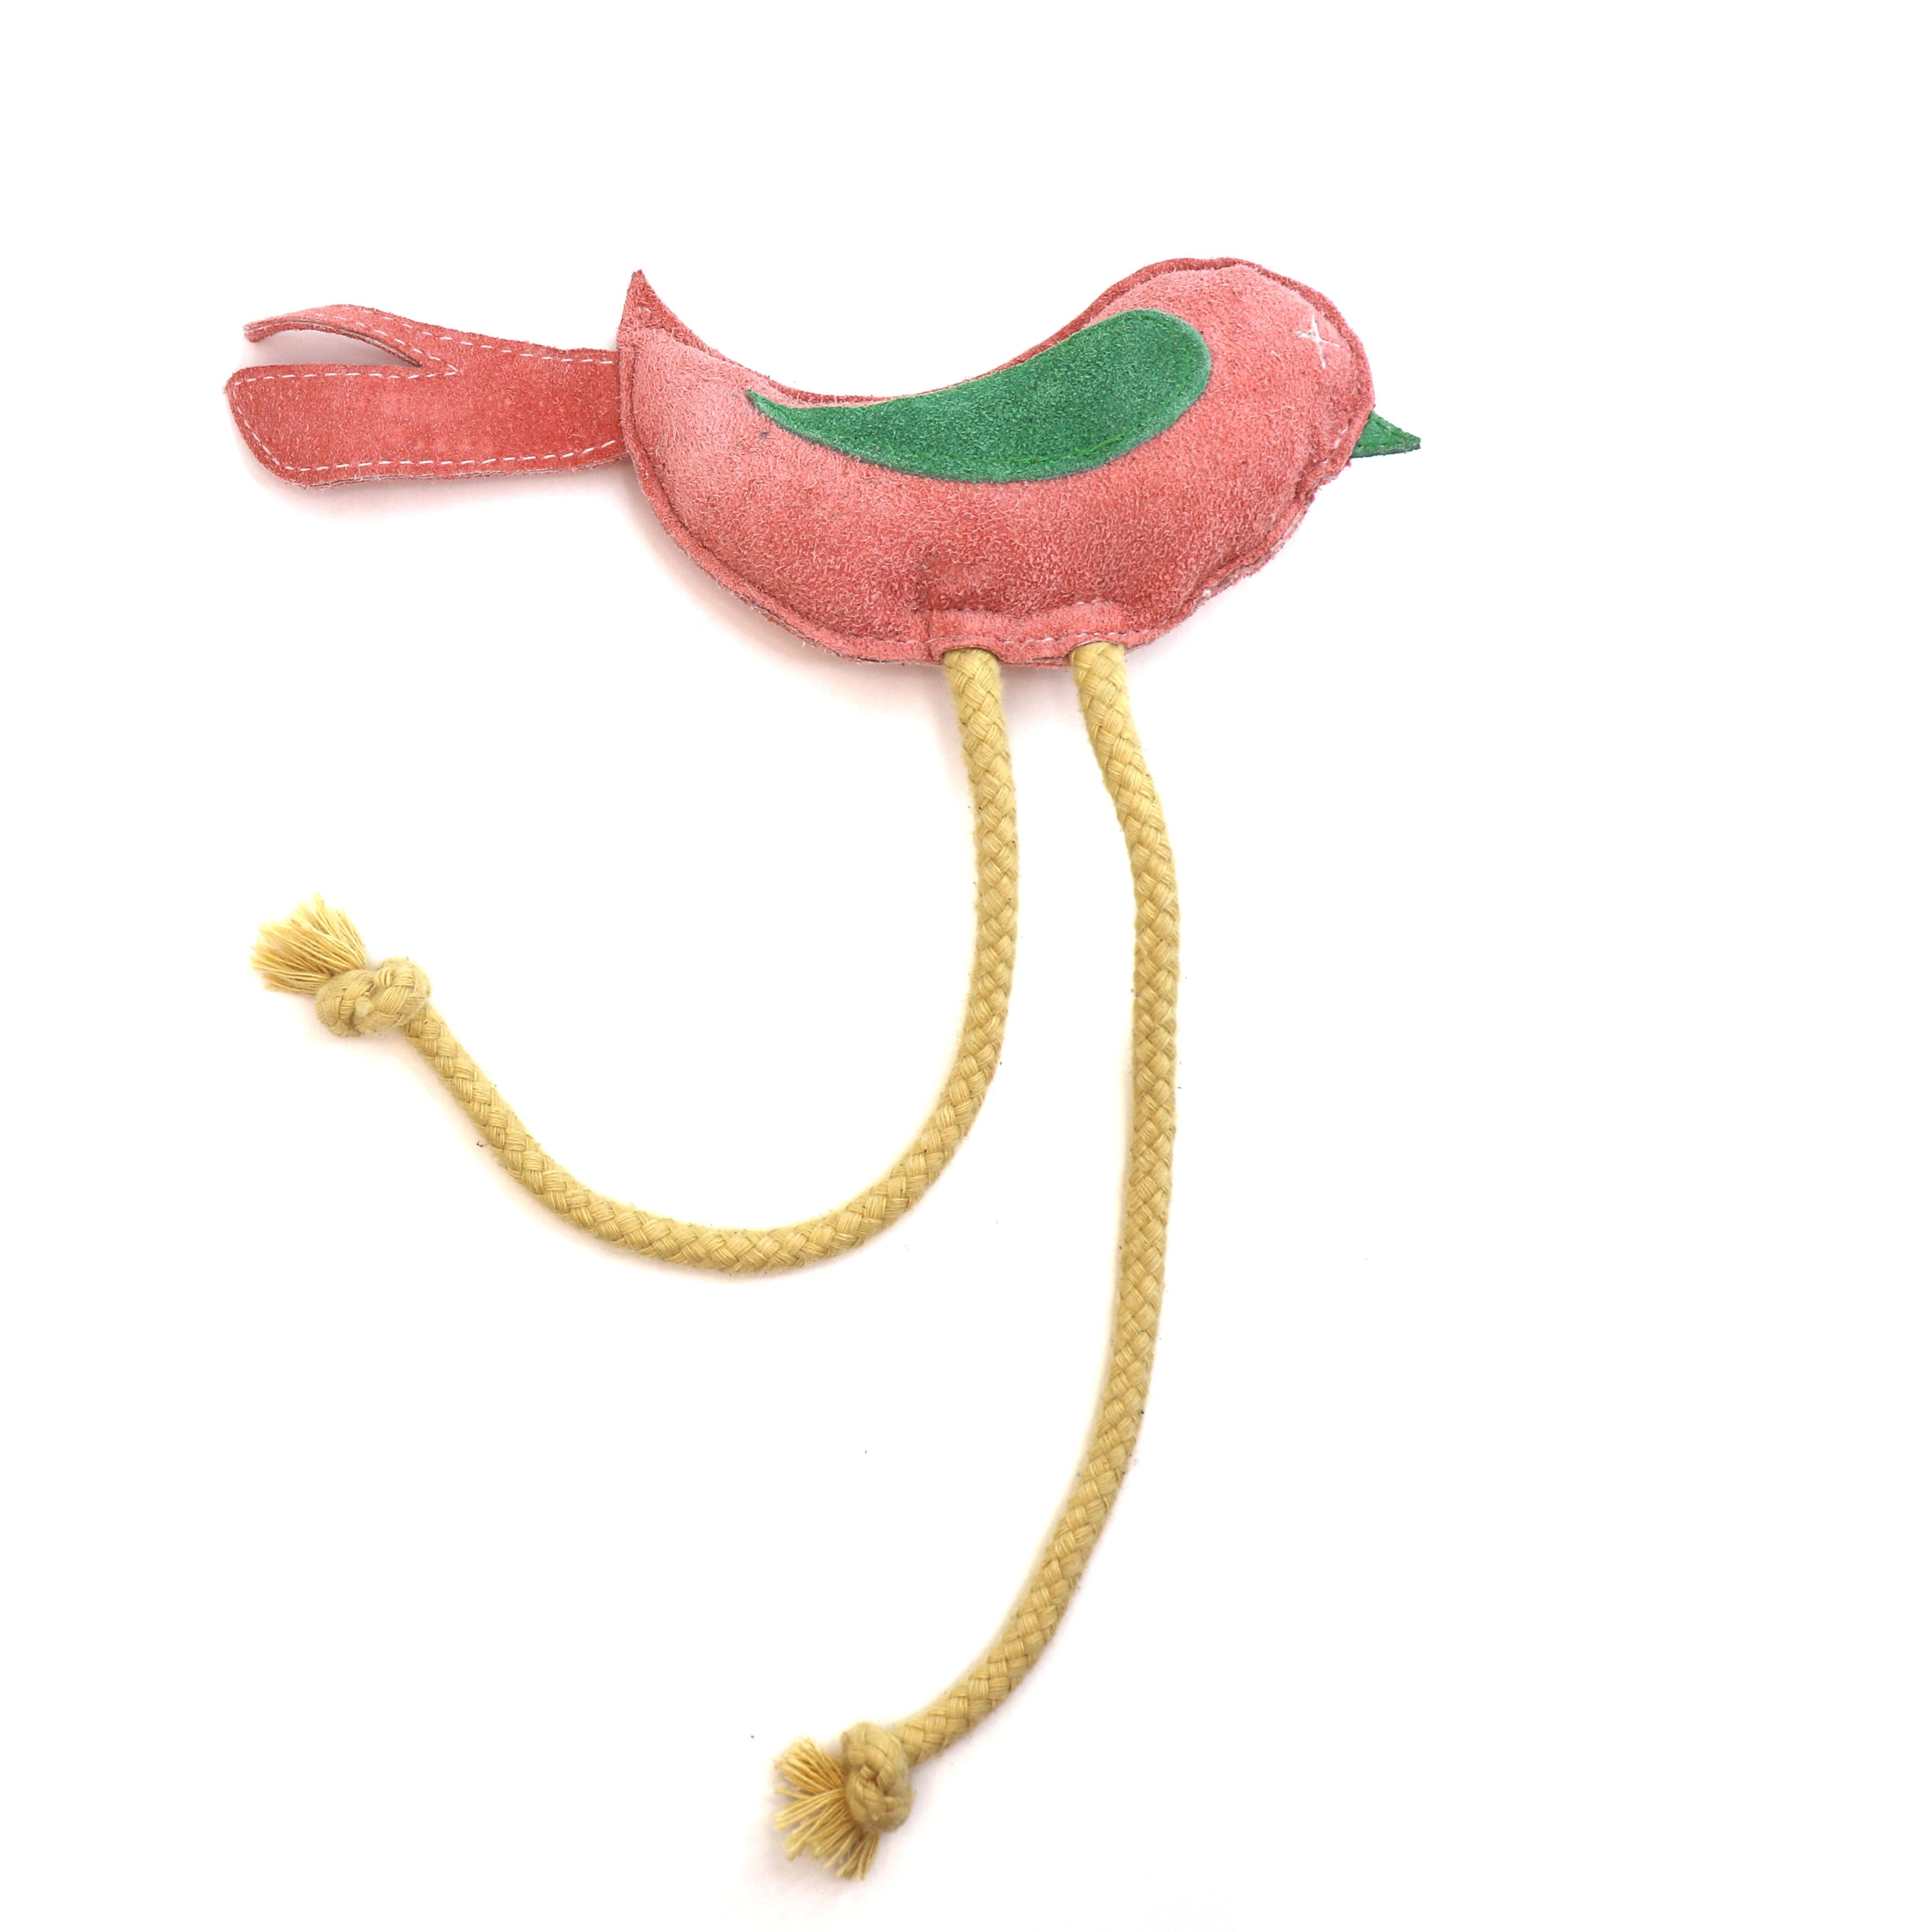 A Birdy Toy in pink fabric bird-shaped toy with a green wing and long yellow rope legs with tassel ends, designed as a biodegradable toy by Georgie Paws, isolated on a white background.